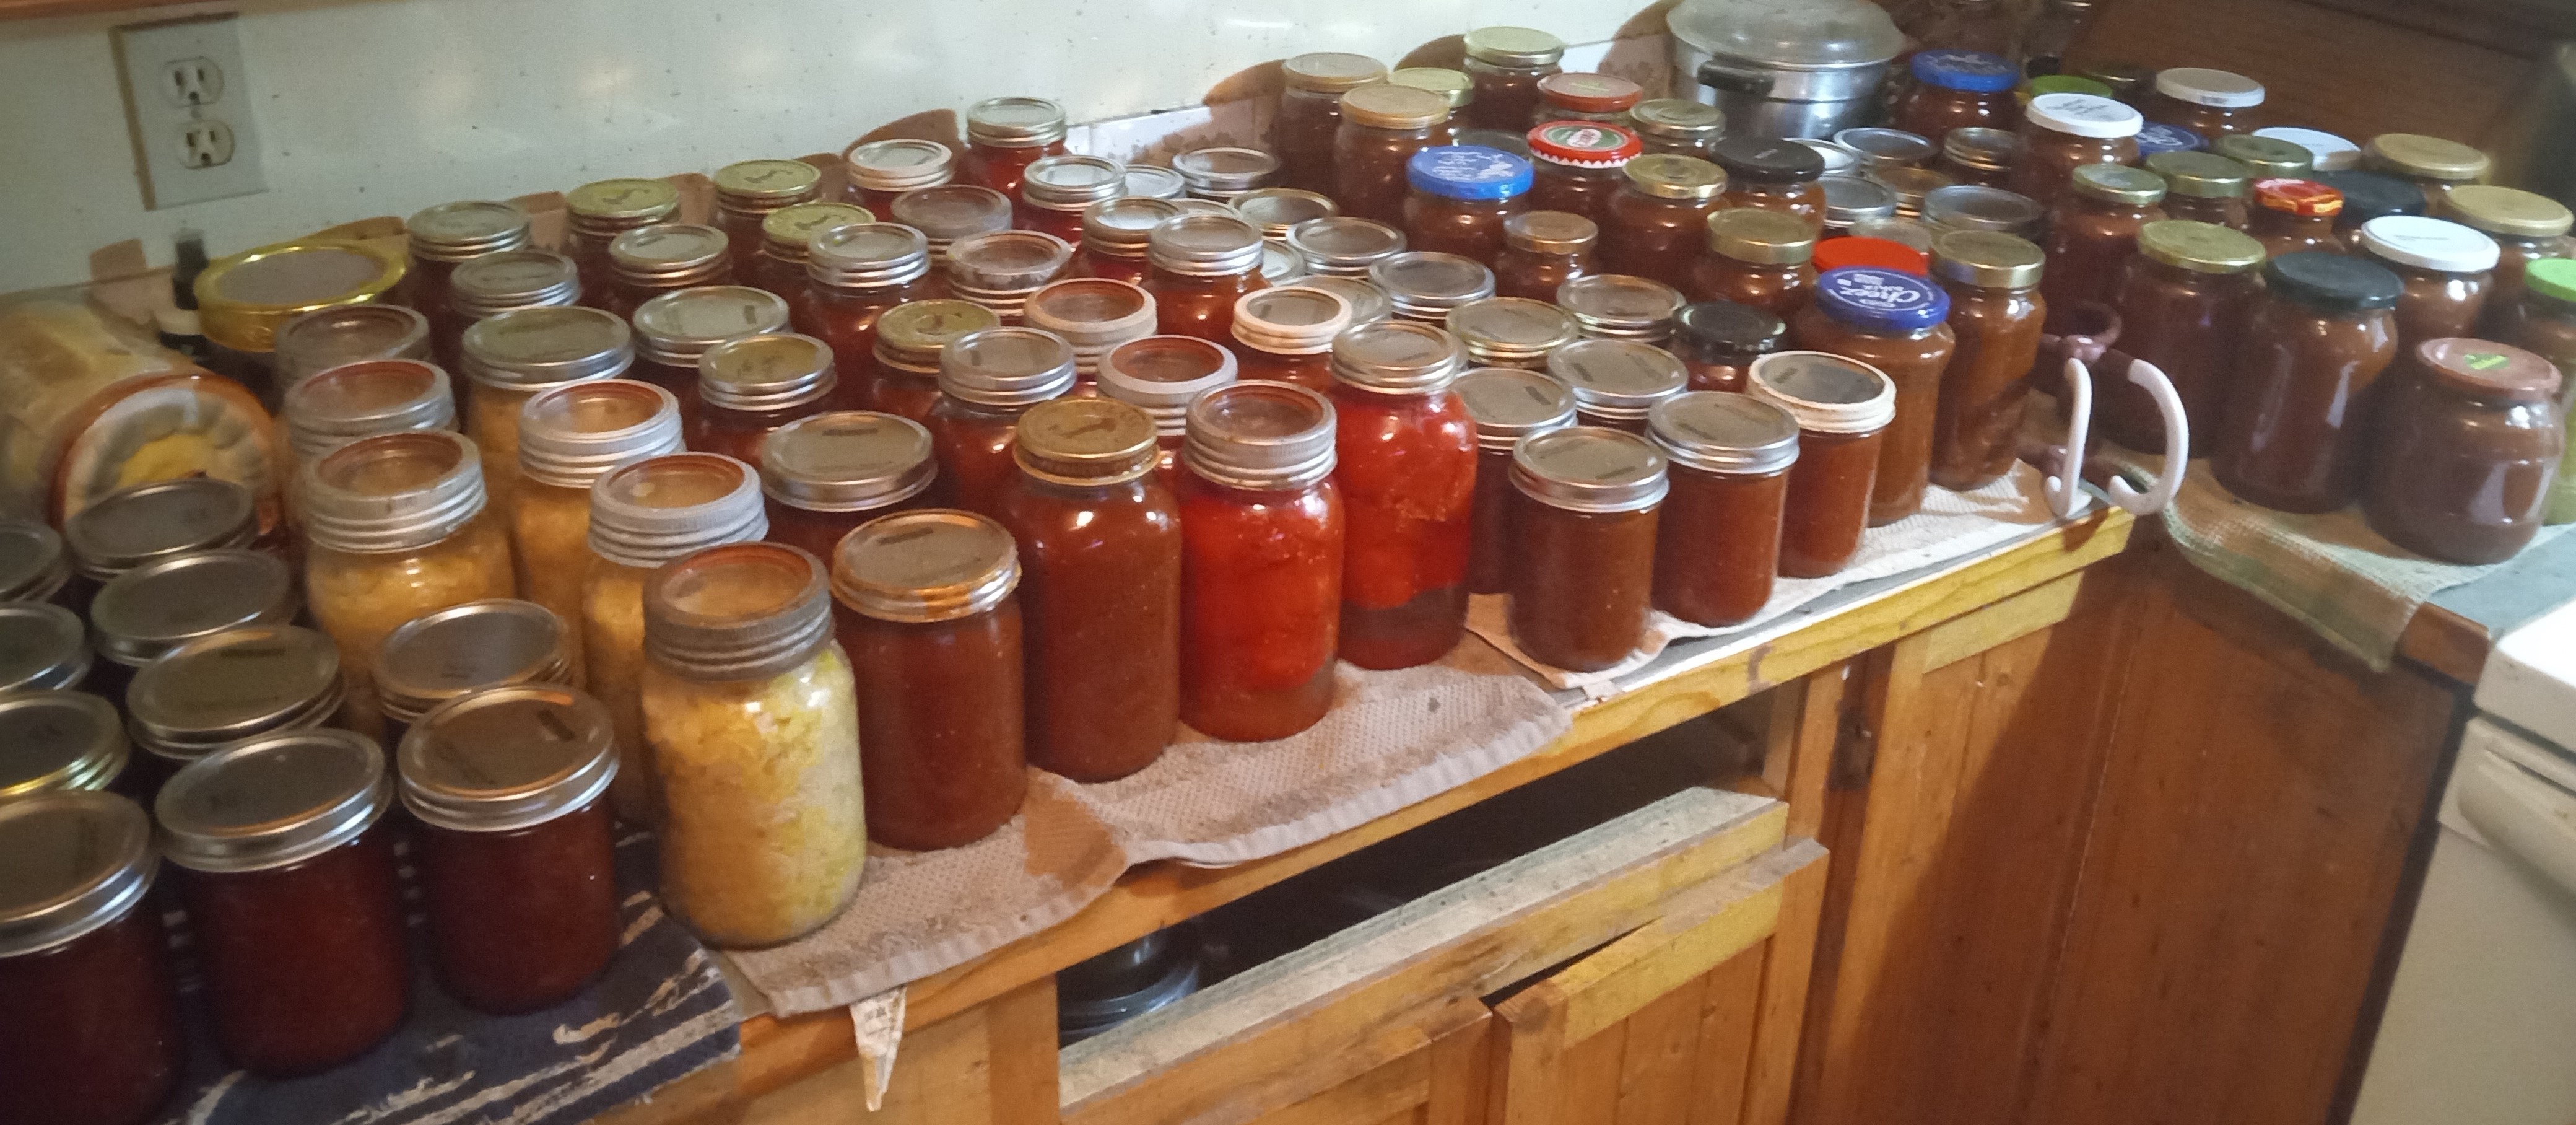 Canning - Preserving by hot water bath canning